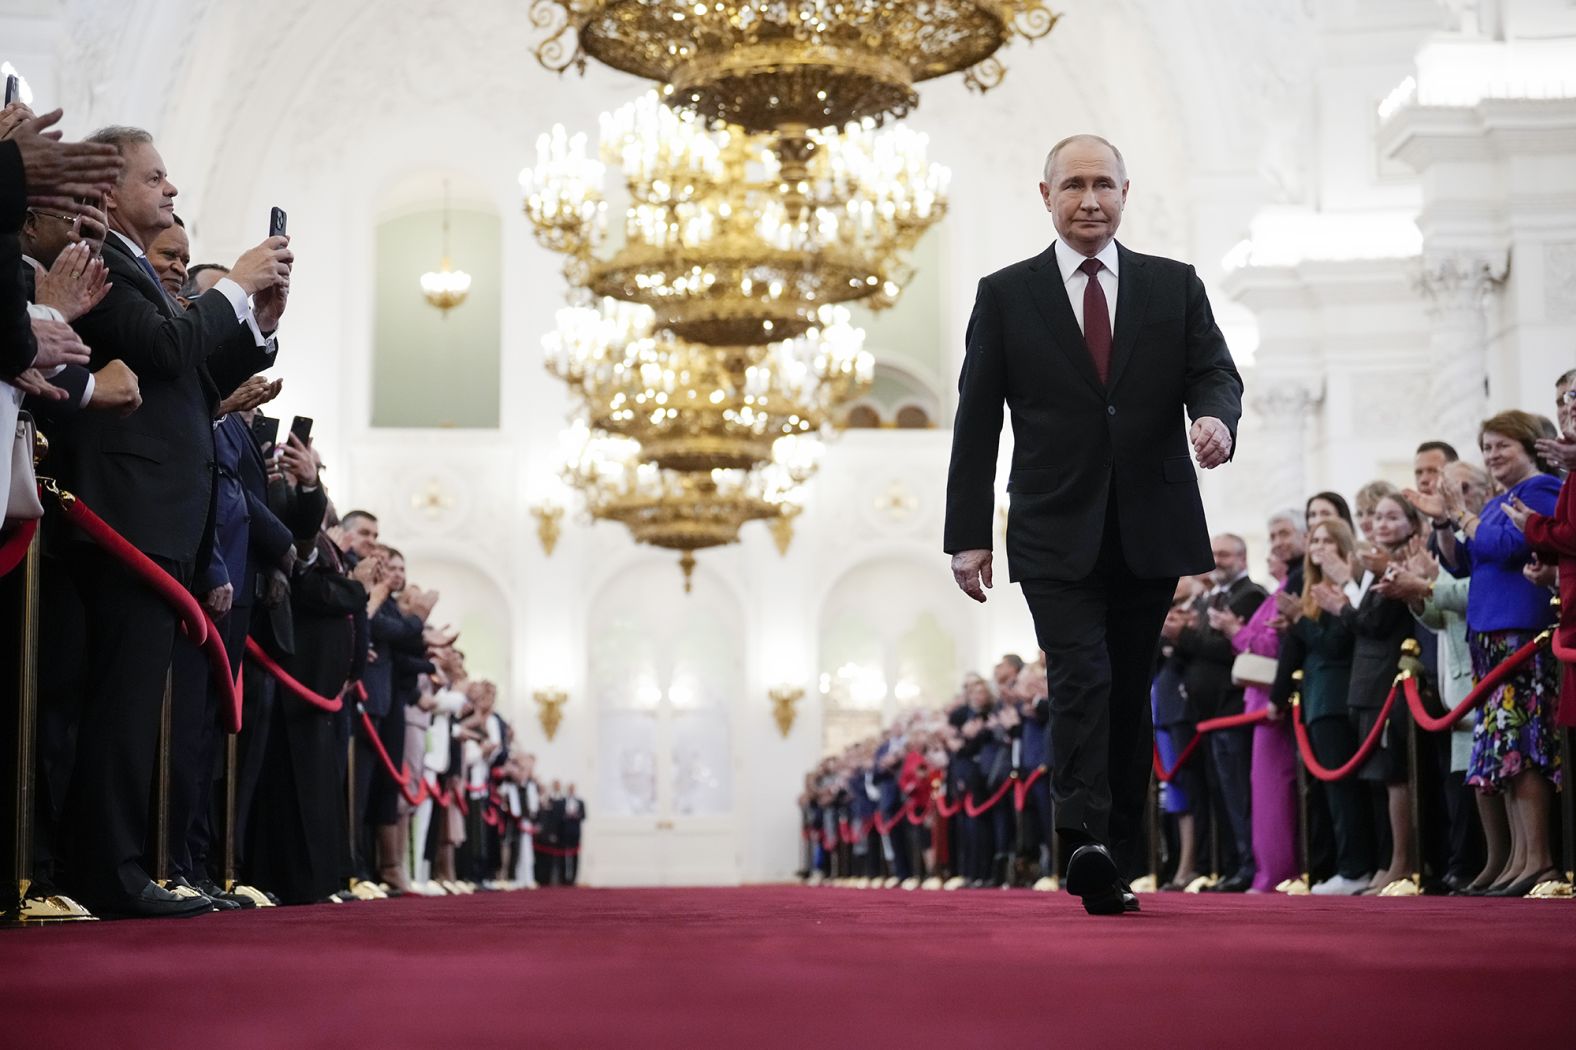 Vladimir Putin walks to take his <a href="index.php?page=&url=https%3A%2F%2Fedition.cnn.com%2F2024%2F05%2F07%2Feurope%2Fputin-inauguration-russia-president-fifth-term-intl%2Findex.html" target="_blank">oath as Russian president</a> during an inauguration ceremony in the Grand Kremlin Palace in Moscow, Russia, on May 7, 2024. 